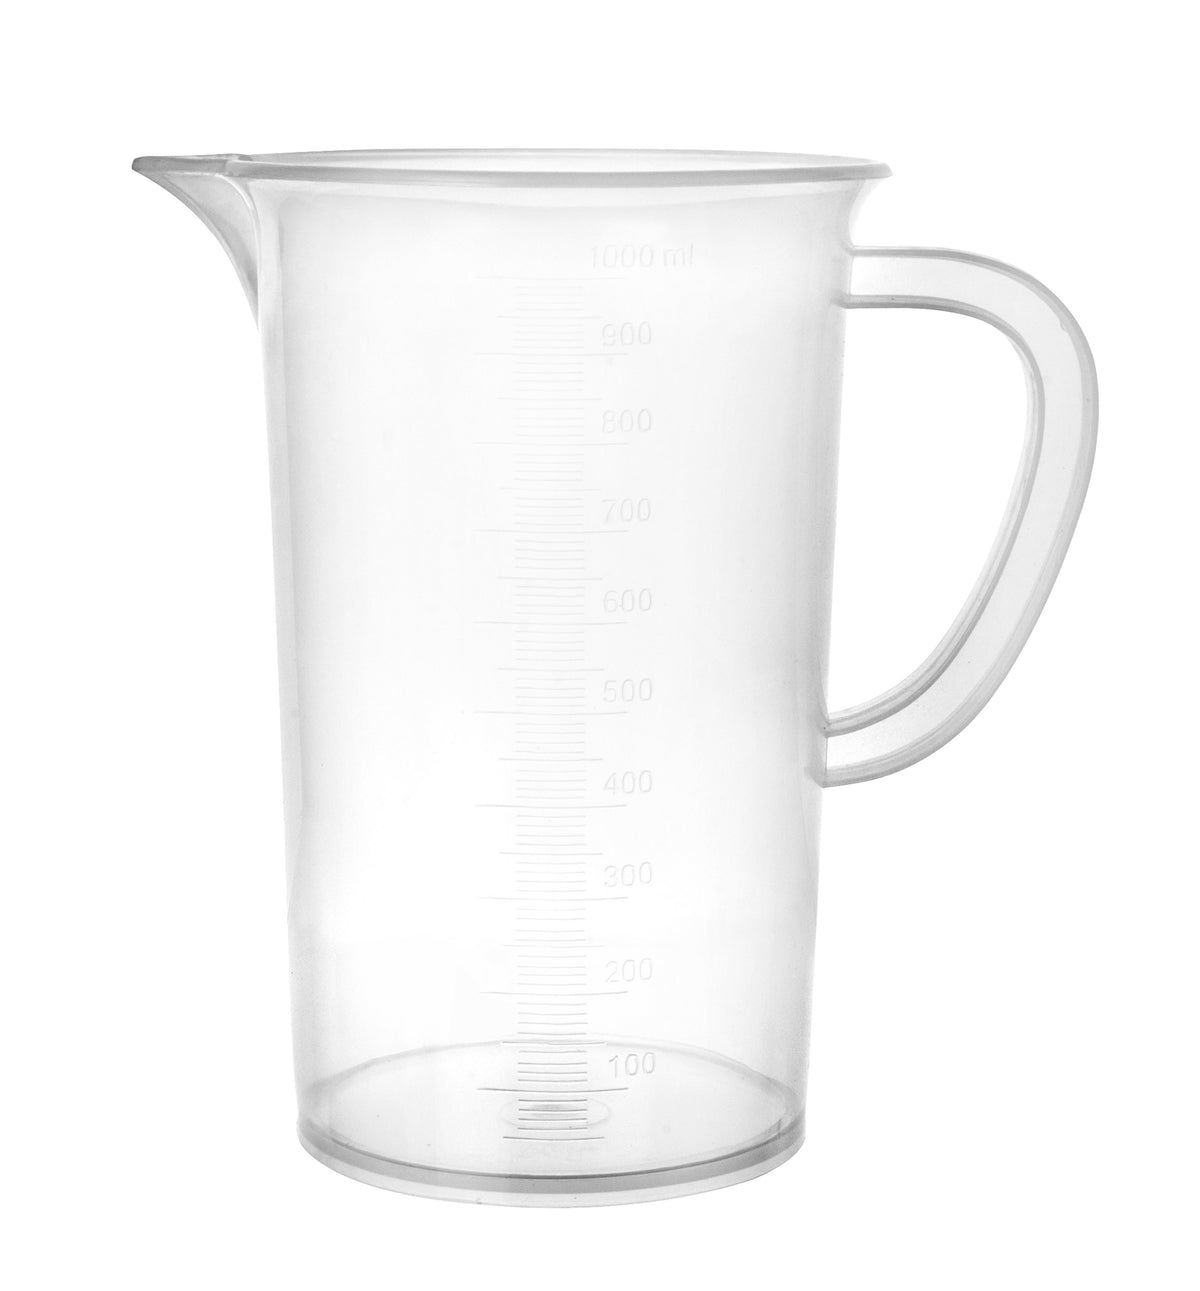 1000ml pouring pitcher